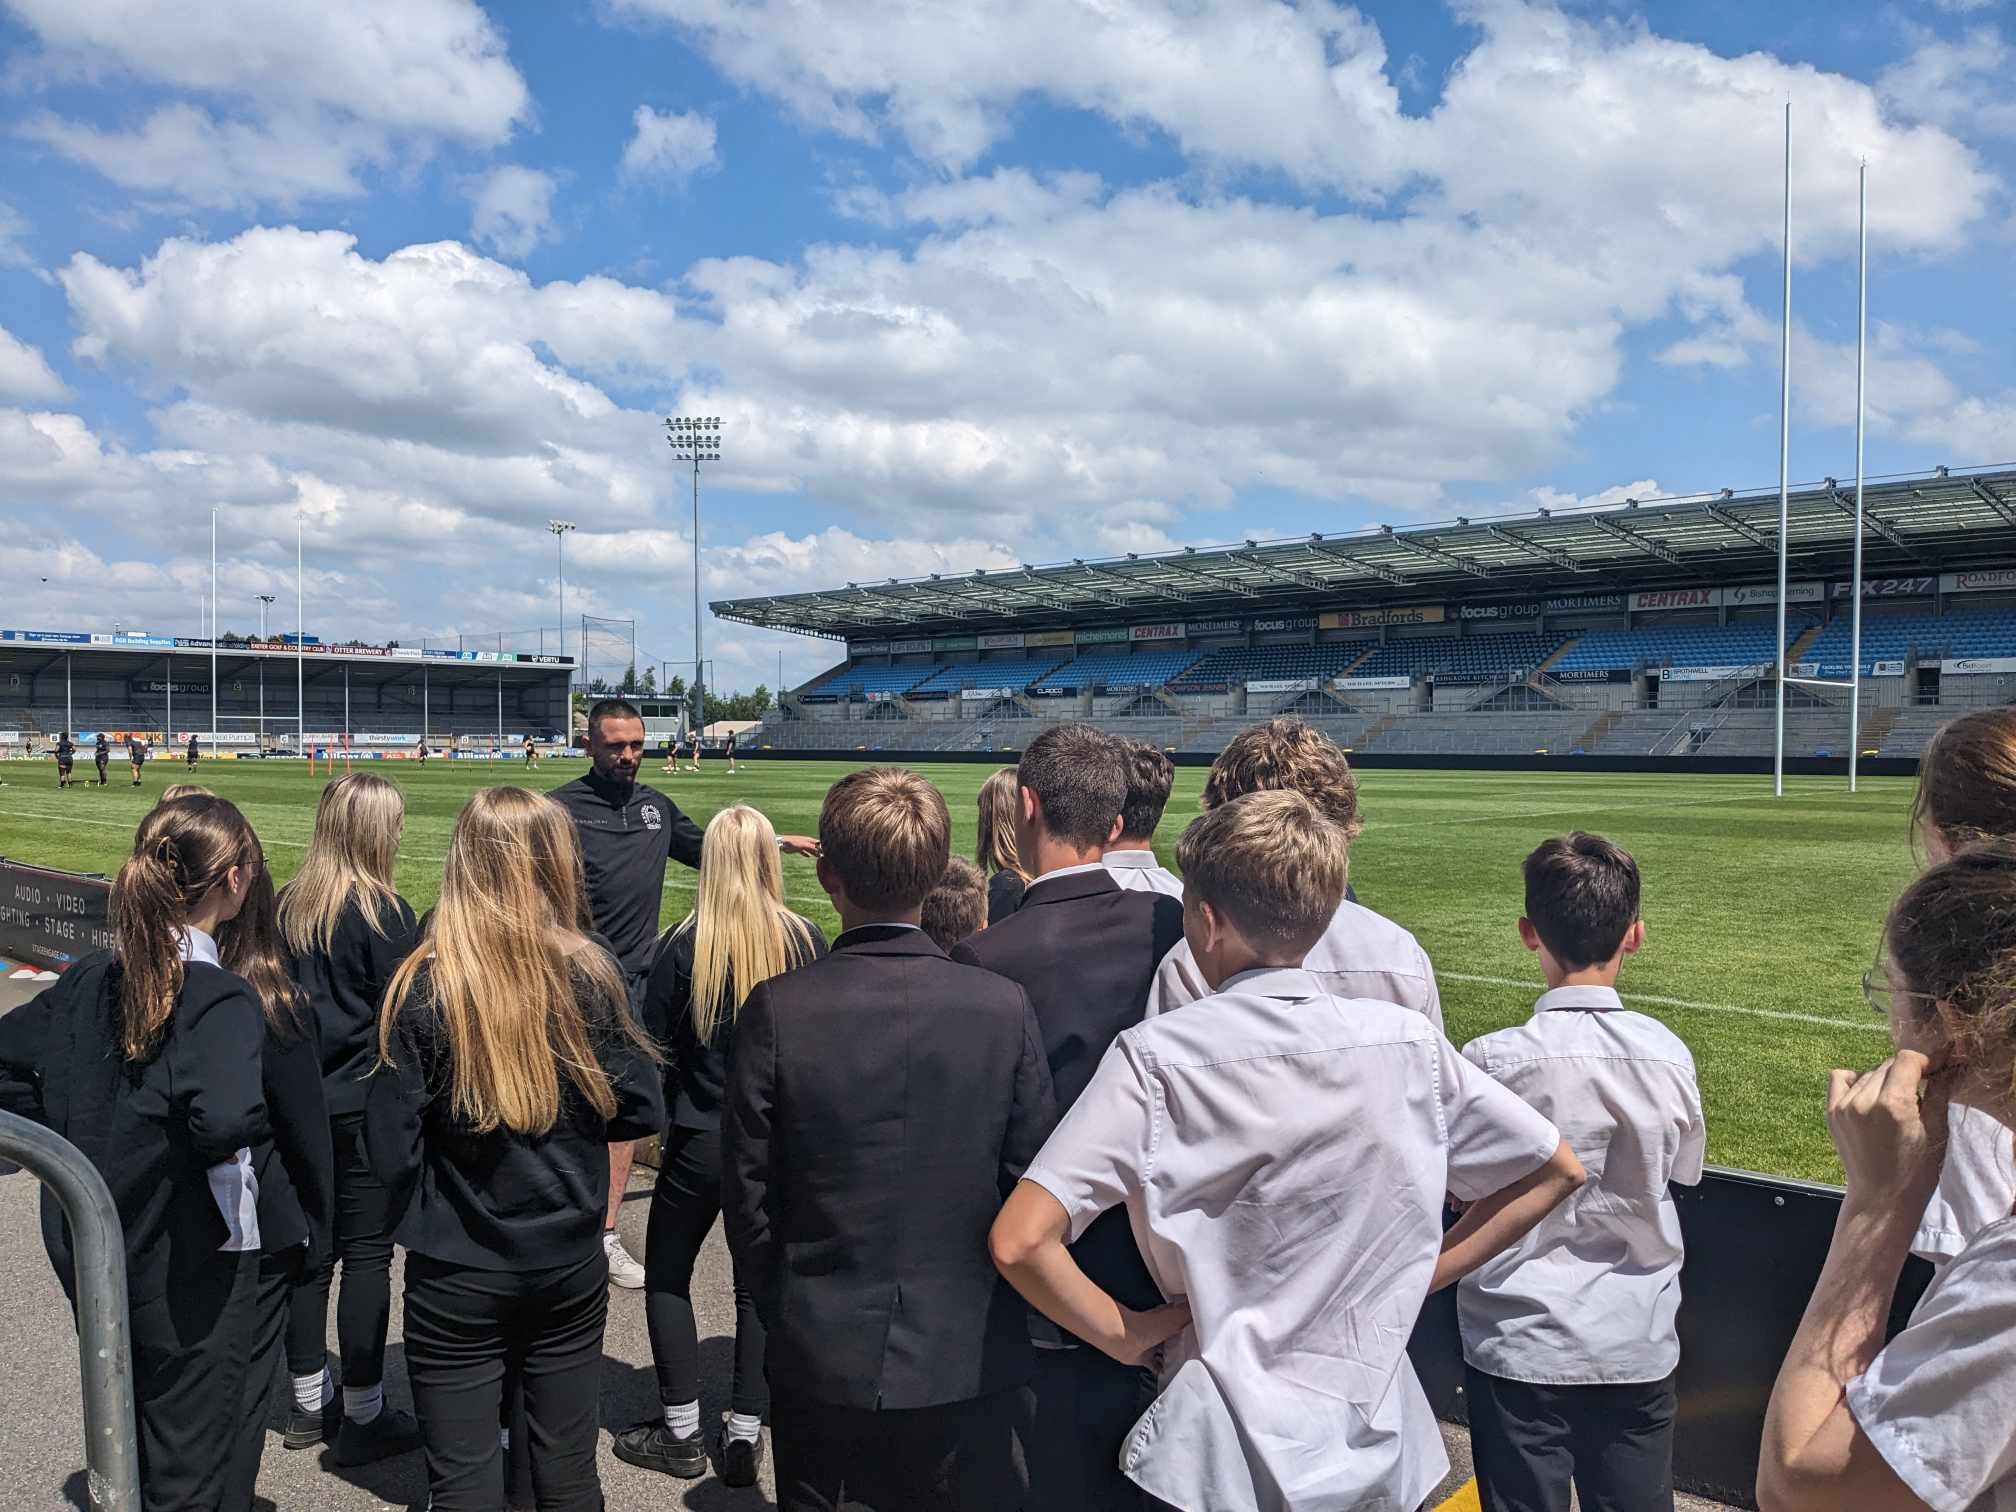 Tiverton High School elite PE students completing a tour of Sandy Park home of the Exeter Chiefs. Exeter Chiefs women's team in background.